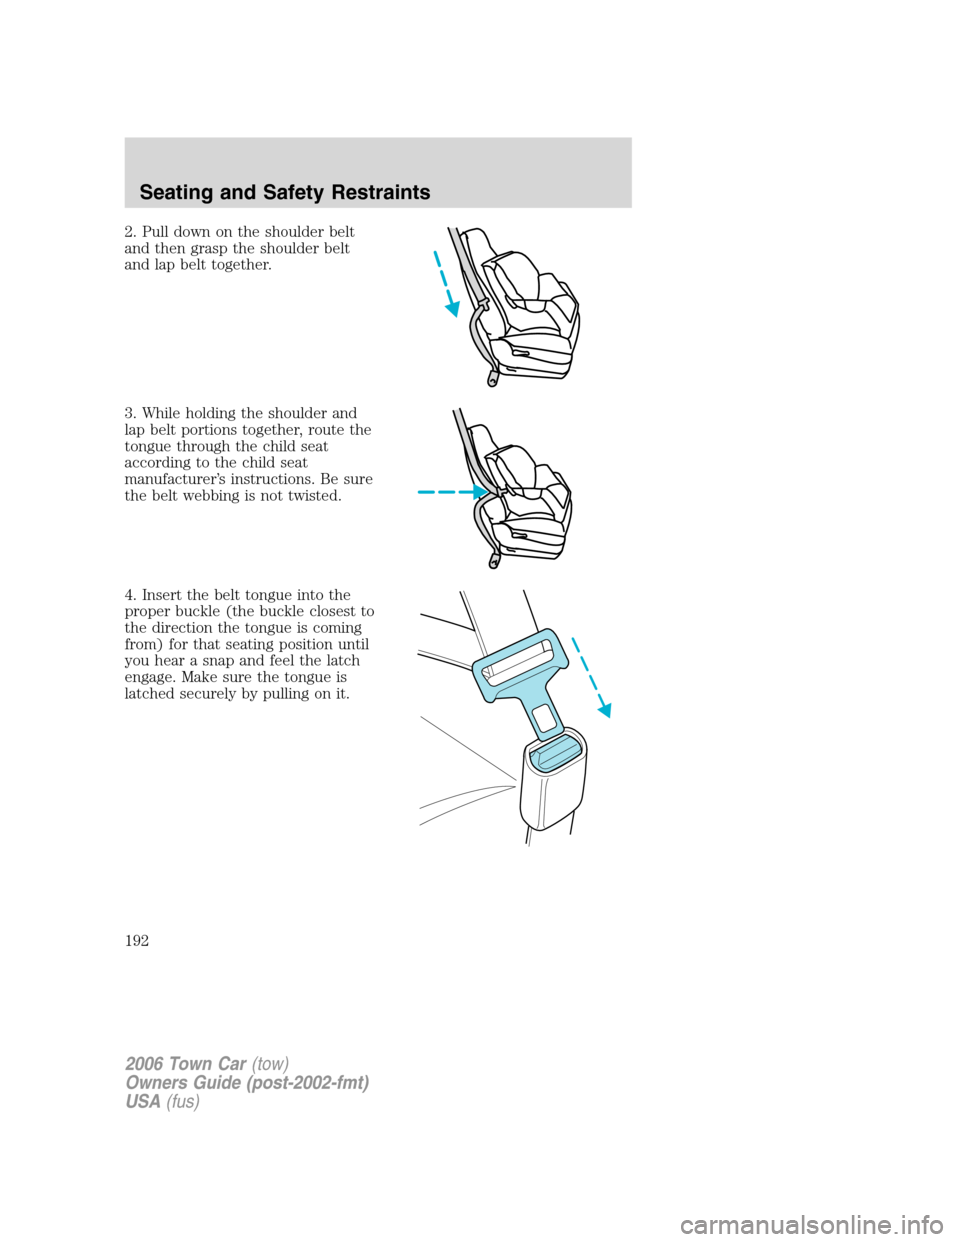 LINCOLN TOWN CAR 2006 Owners Guide 2. Pull down on the shoulder belt
and then grasp the shoulder belt
and lap belt together.
3. While holding the shoulder and
lap belt portions together, route the
tongue through the child seat
accordin